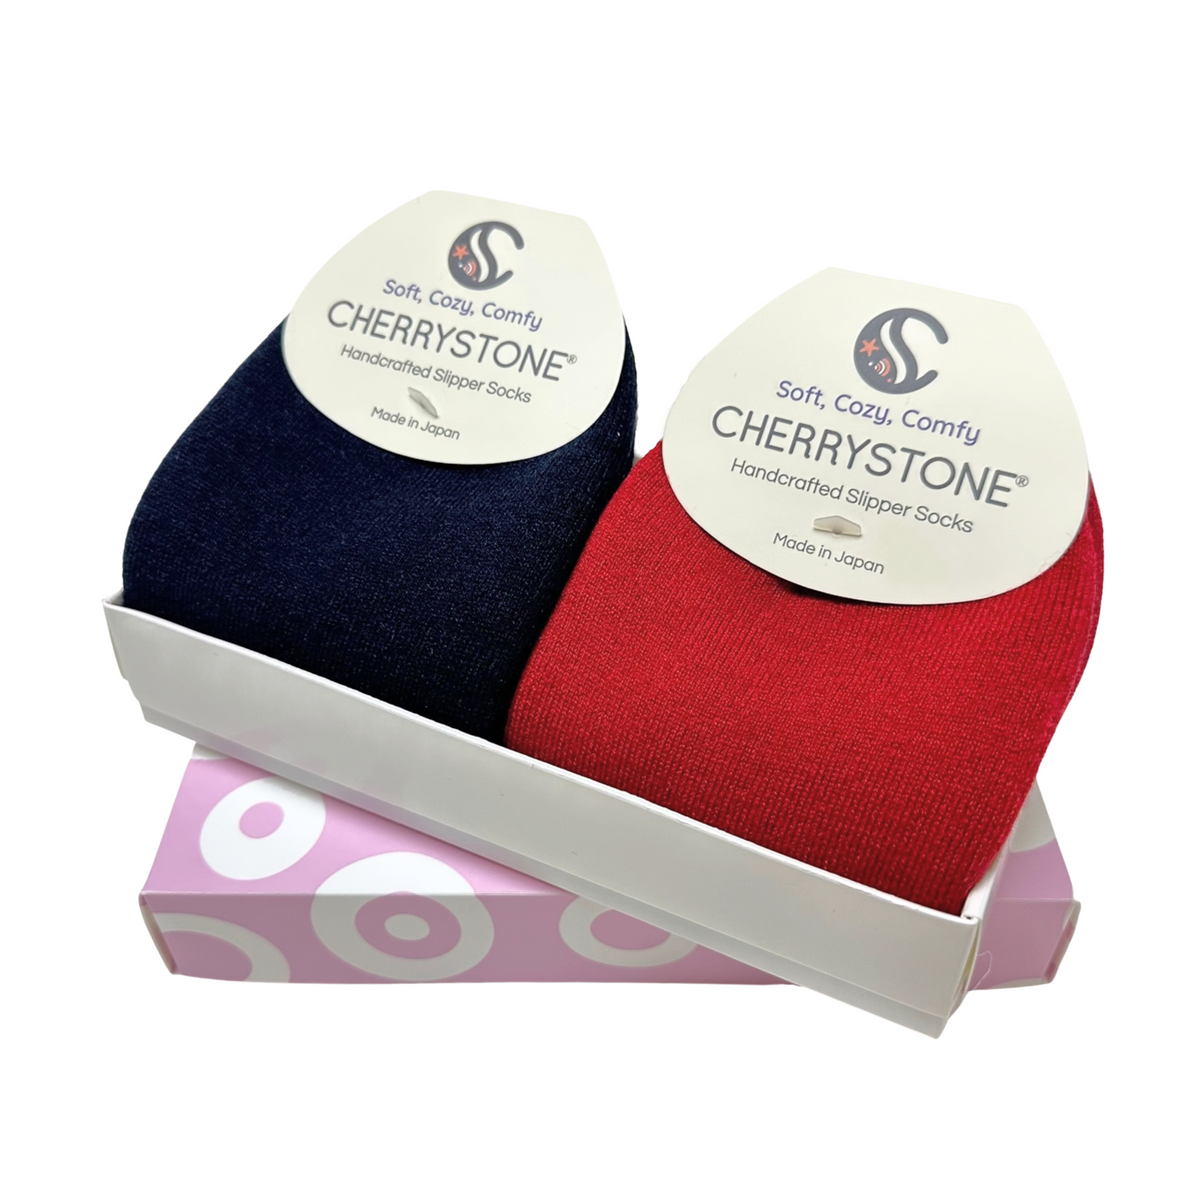 *2 PAIRS IN THE GIFT BOX * Wool Blend Slipper Socks | Classic Color NO Grip | Size Medium |  Red and Navy with Crocheted Trim - CHERRYSTONEstyle